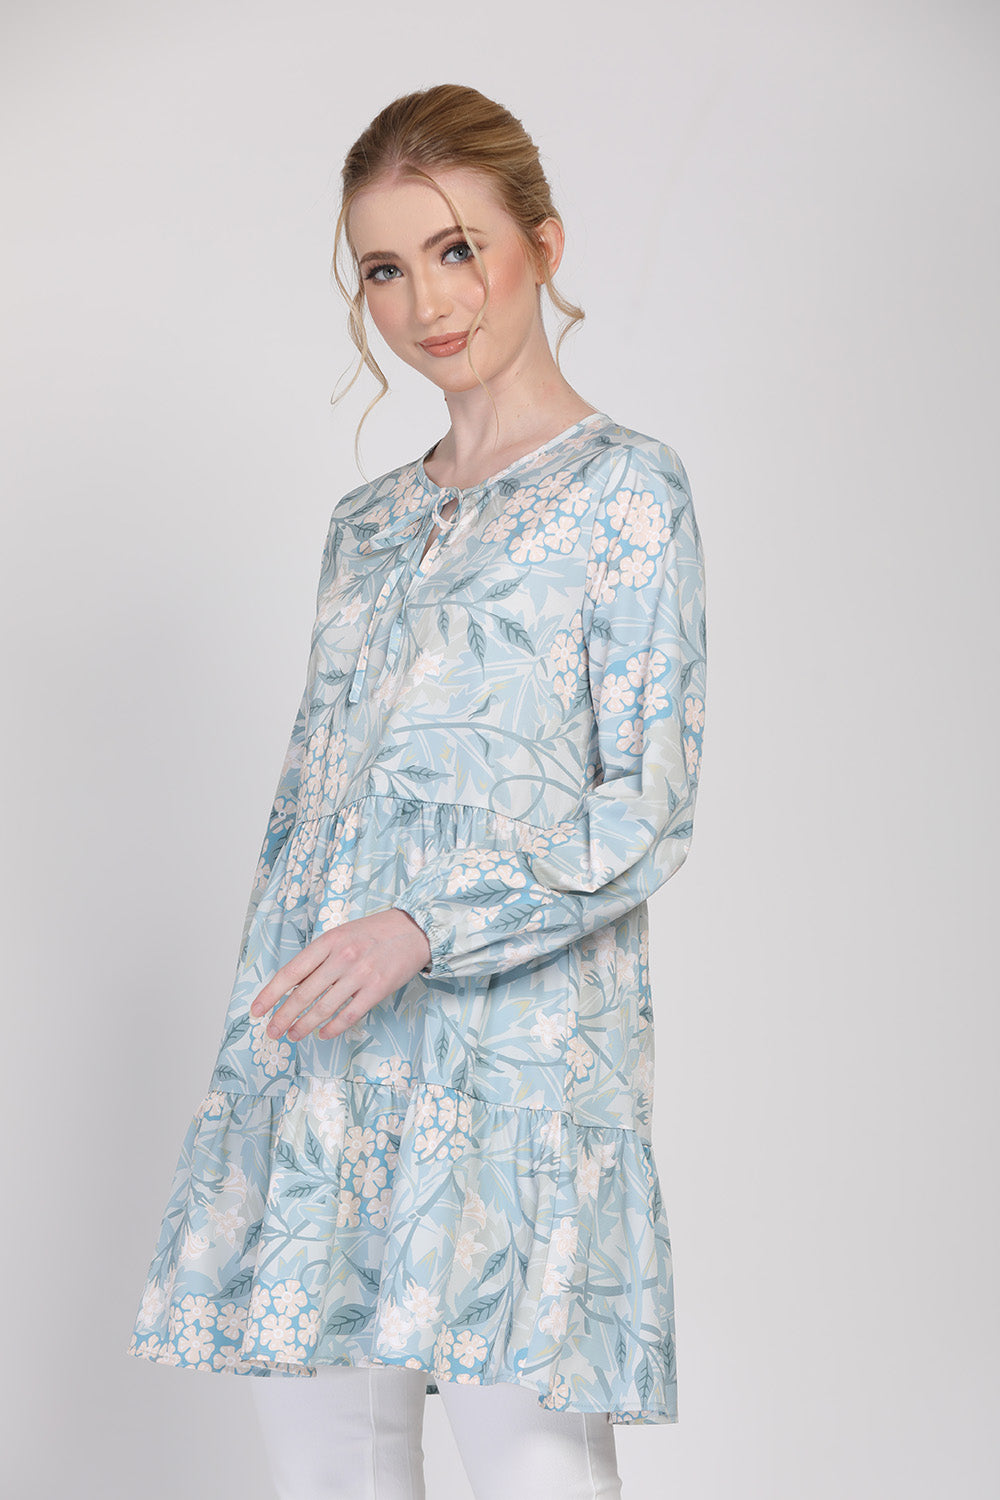 The Botani Floral Tunic in Dusty Green